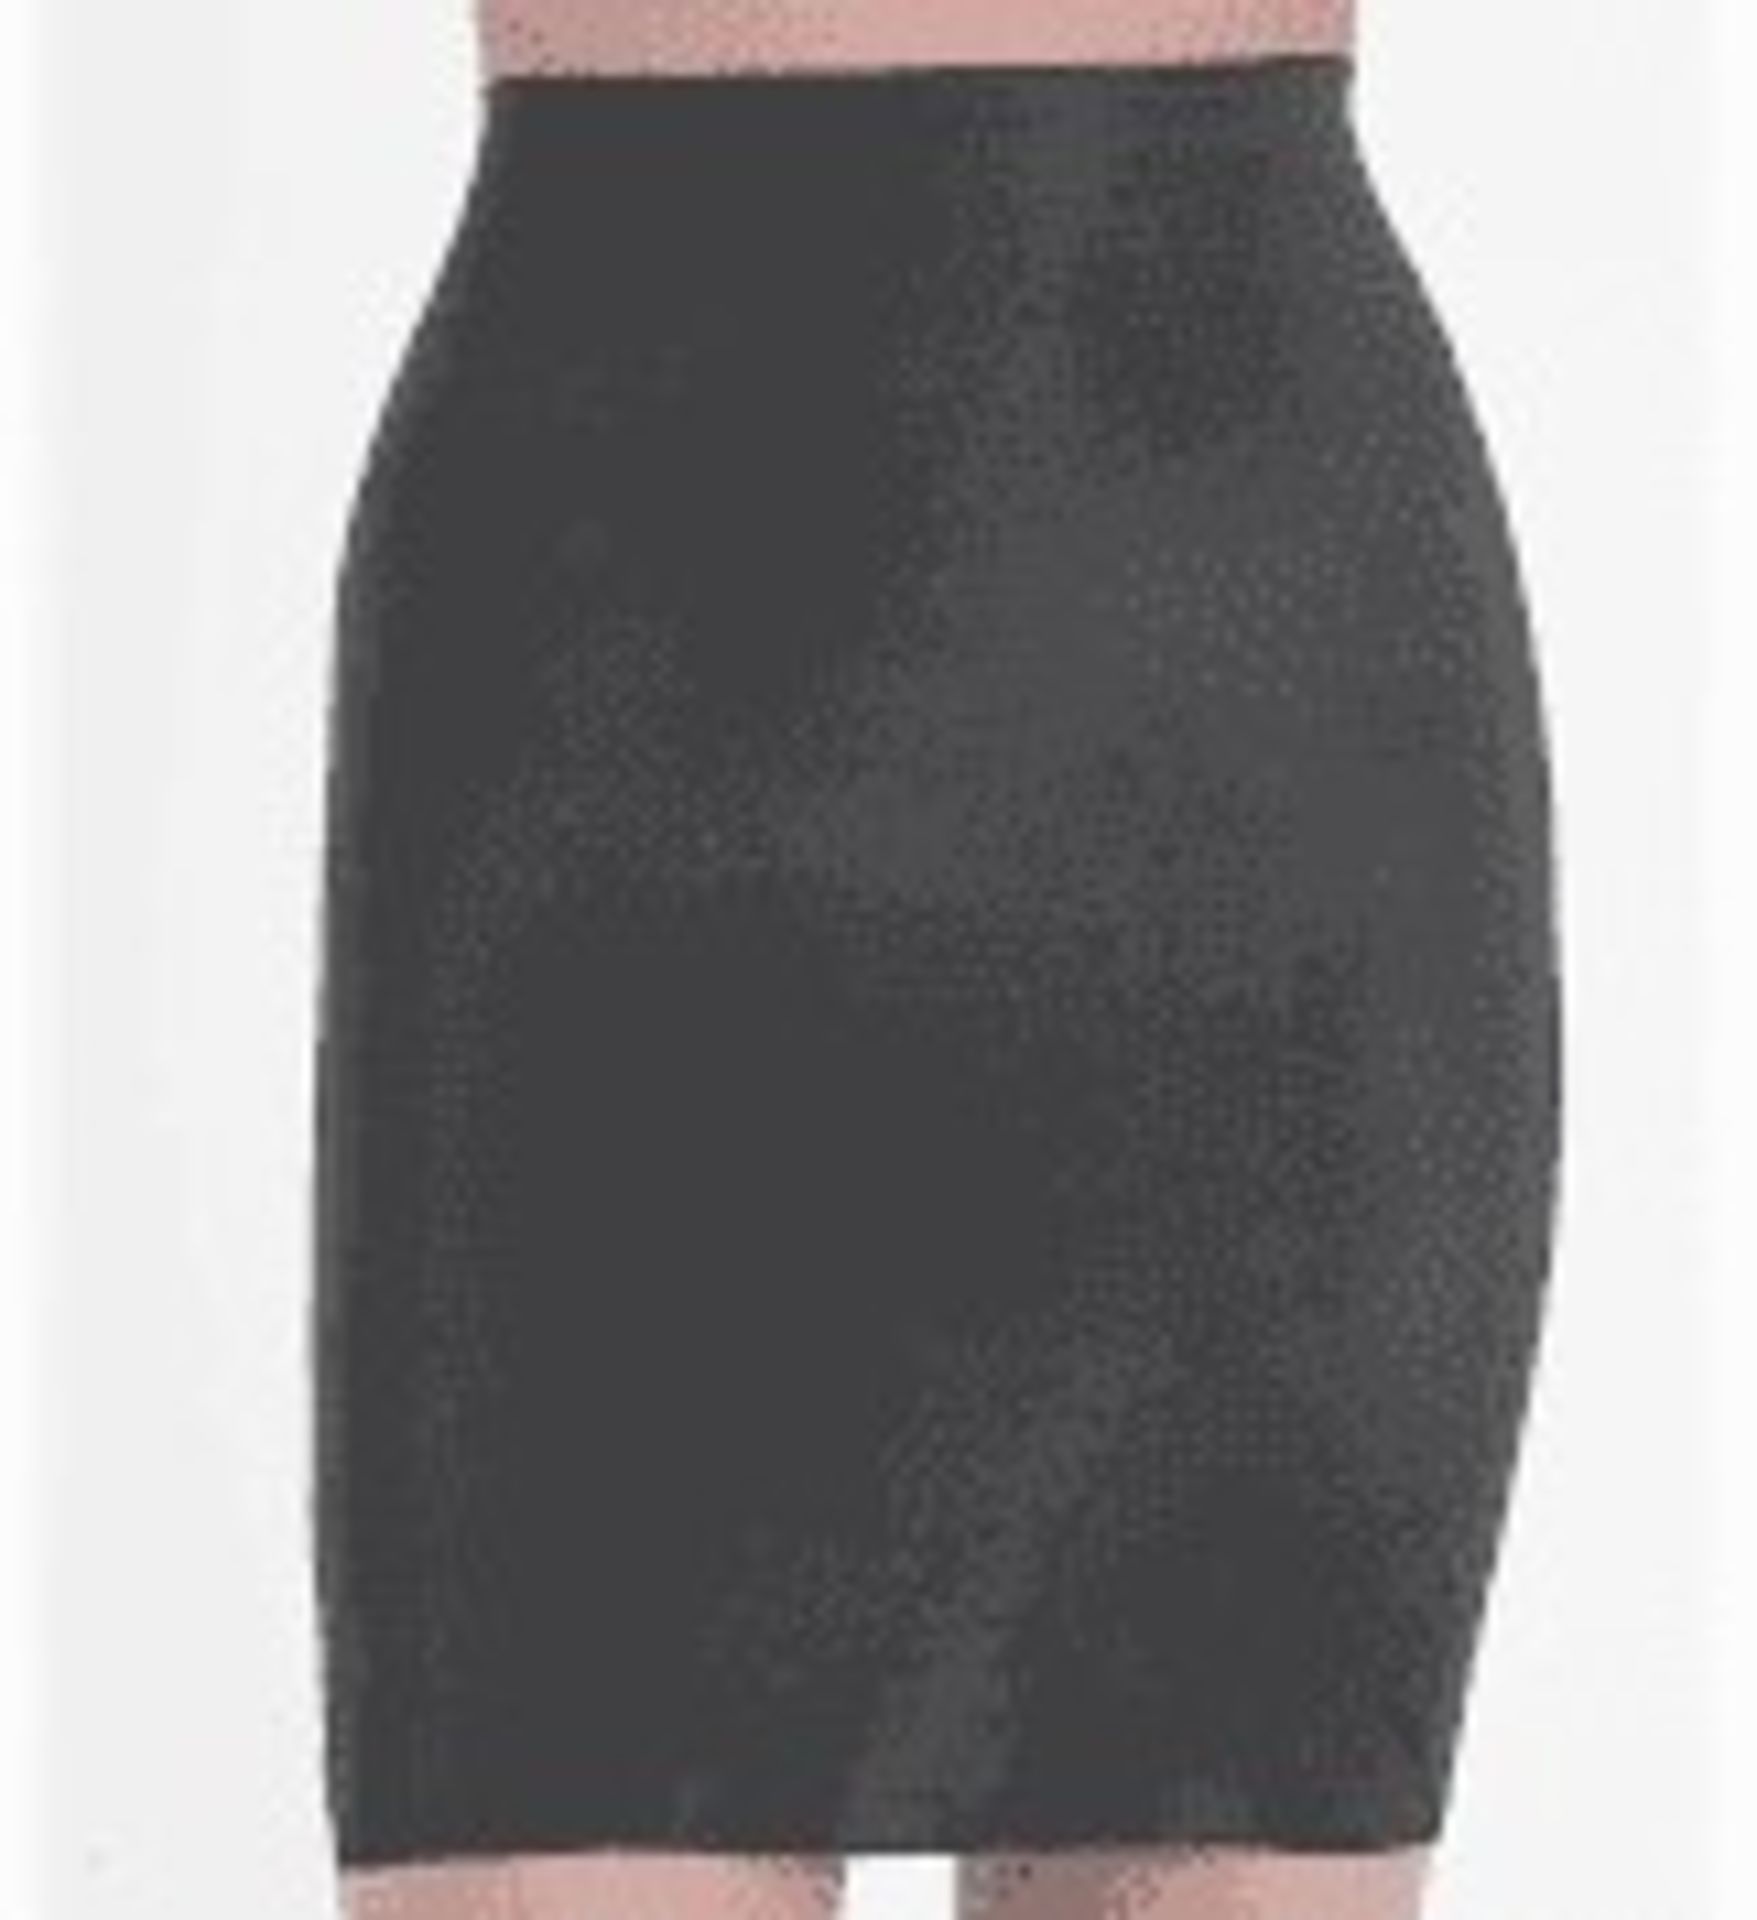 1 LOT TO CONTAIN 5 SPANX SKIRTS IN BOLD BLACK / SIZE 14 / STYLE 1899 / RRP £440.00 (PUBLIC VIEWING - Image 2 of 2